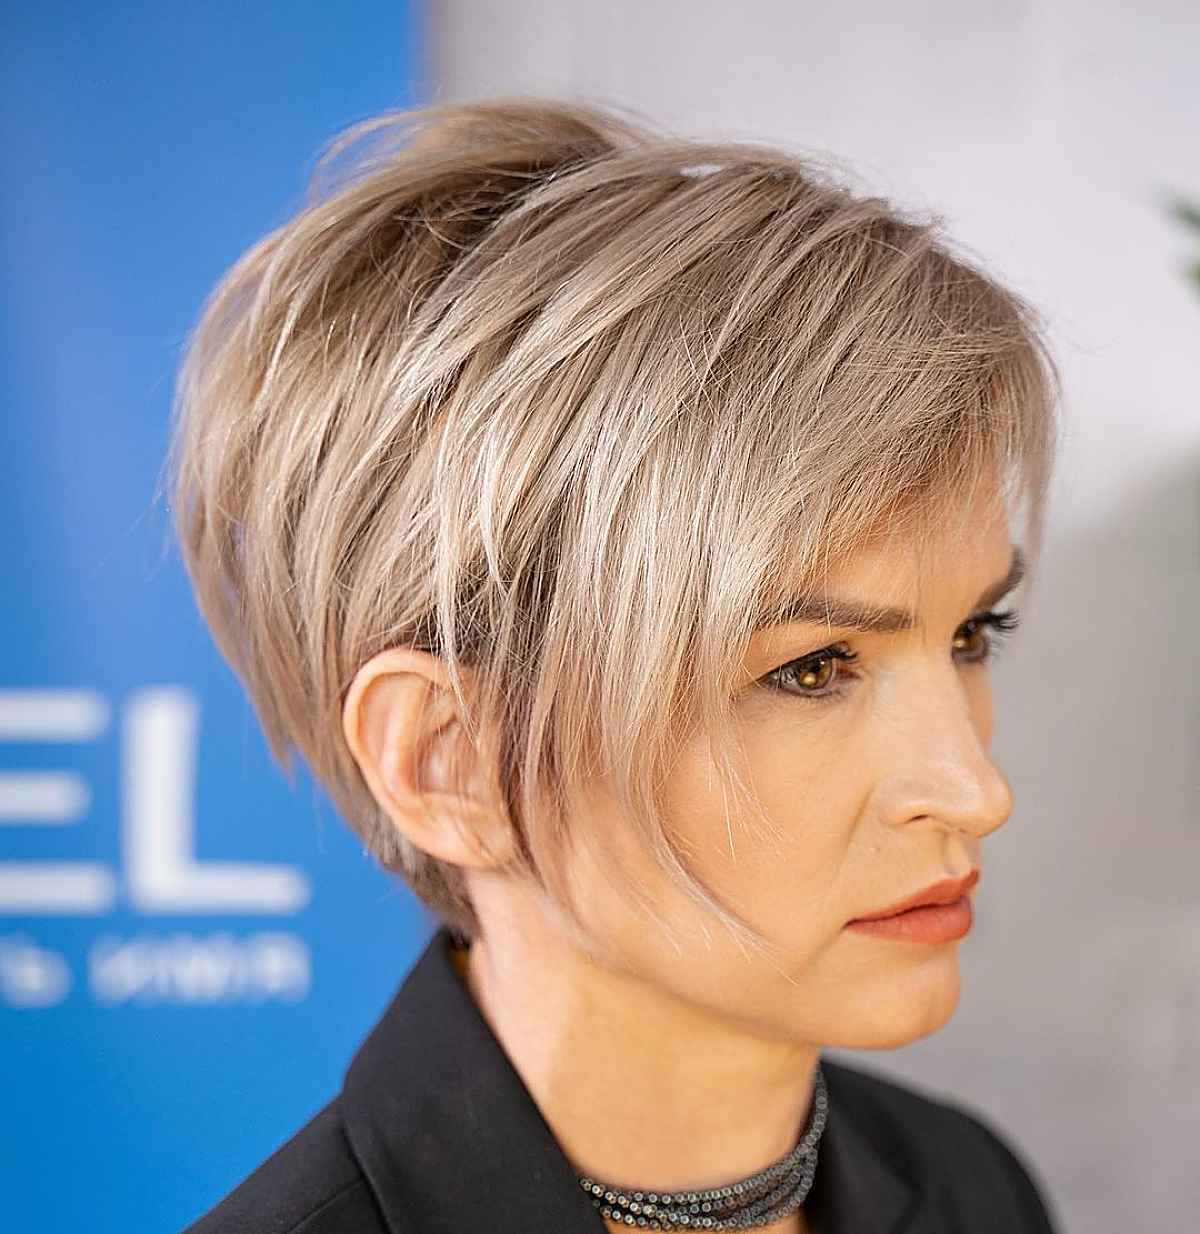 chic pixie with side fringe and side burns